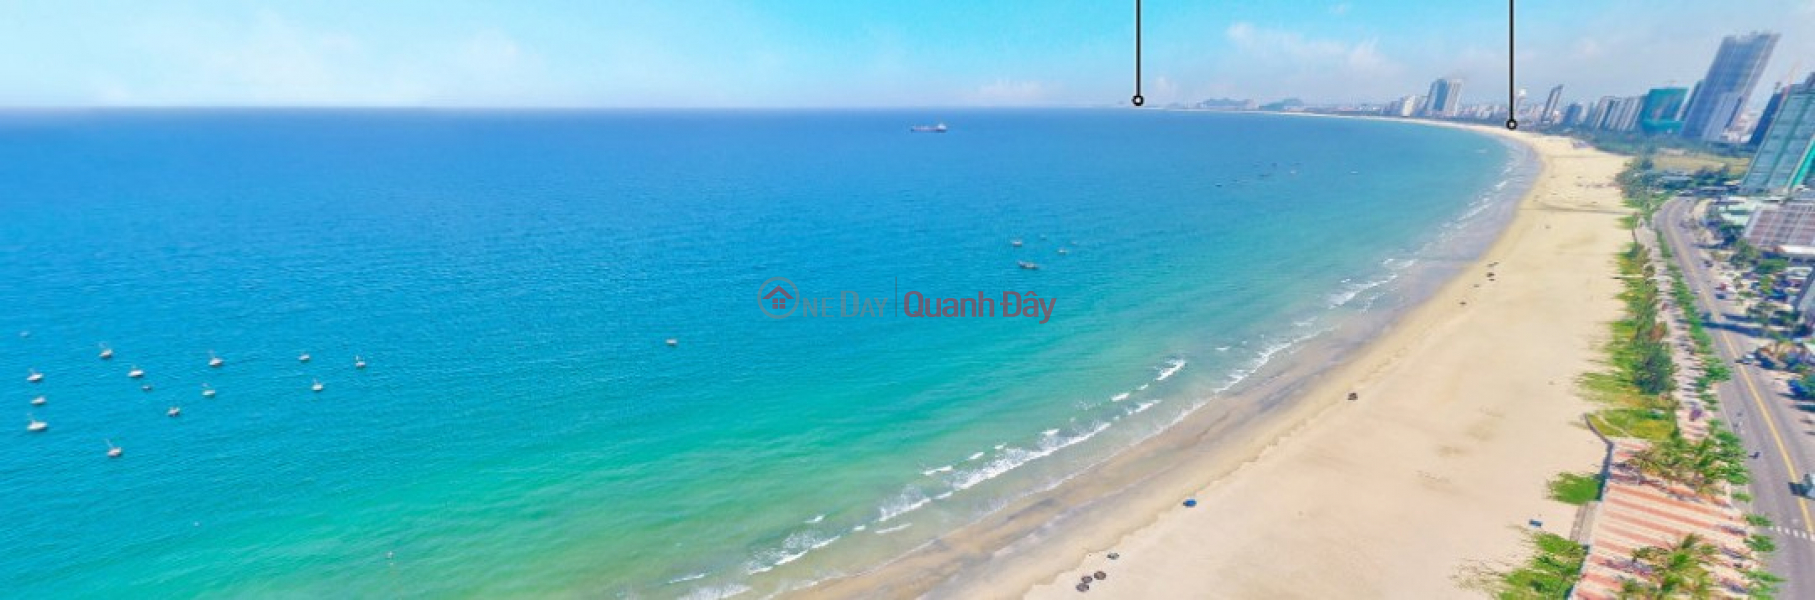 Hotel for rent 3 * 60p 220tr, 1km from the sea - UYEN N0731L Rental Listings